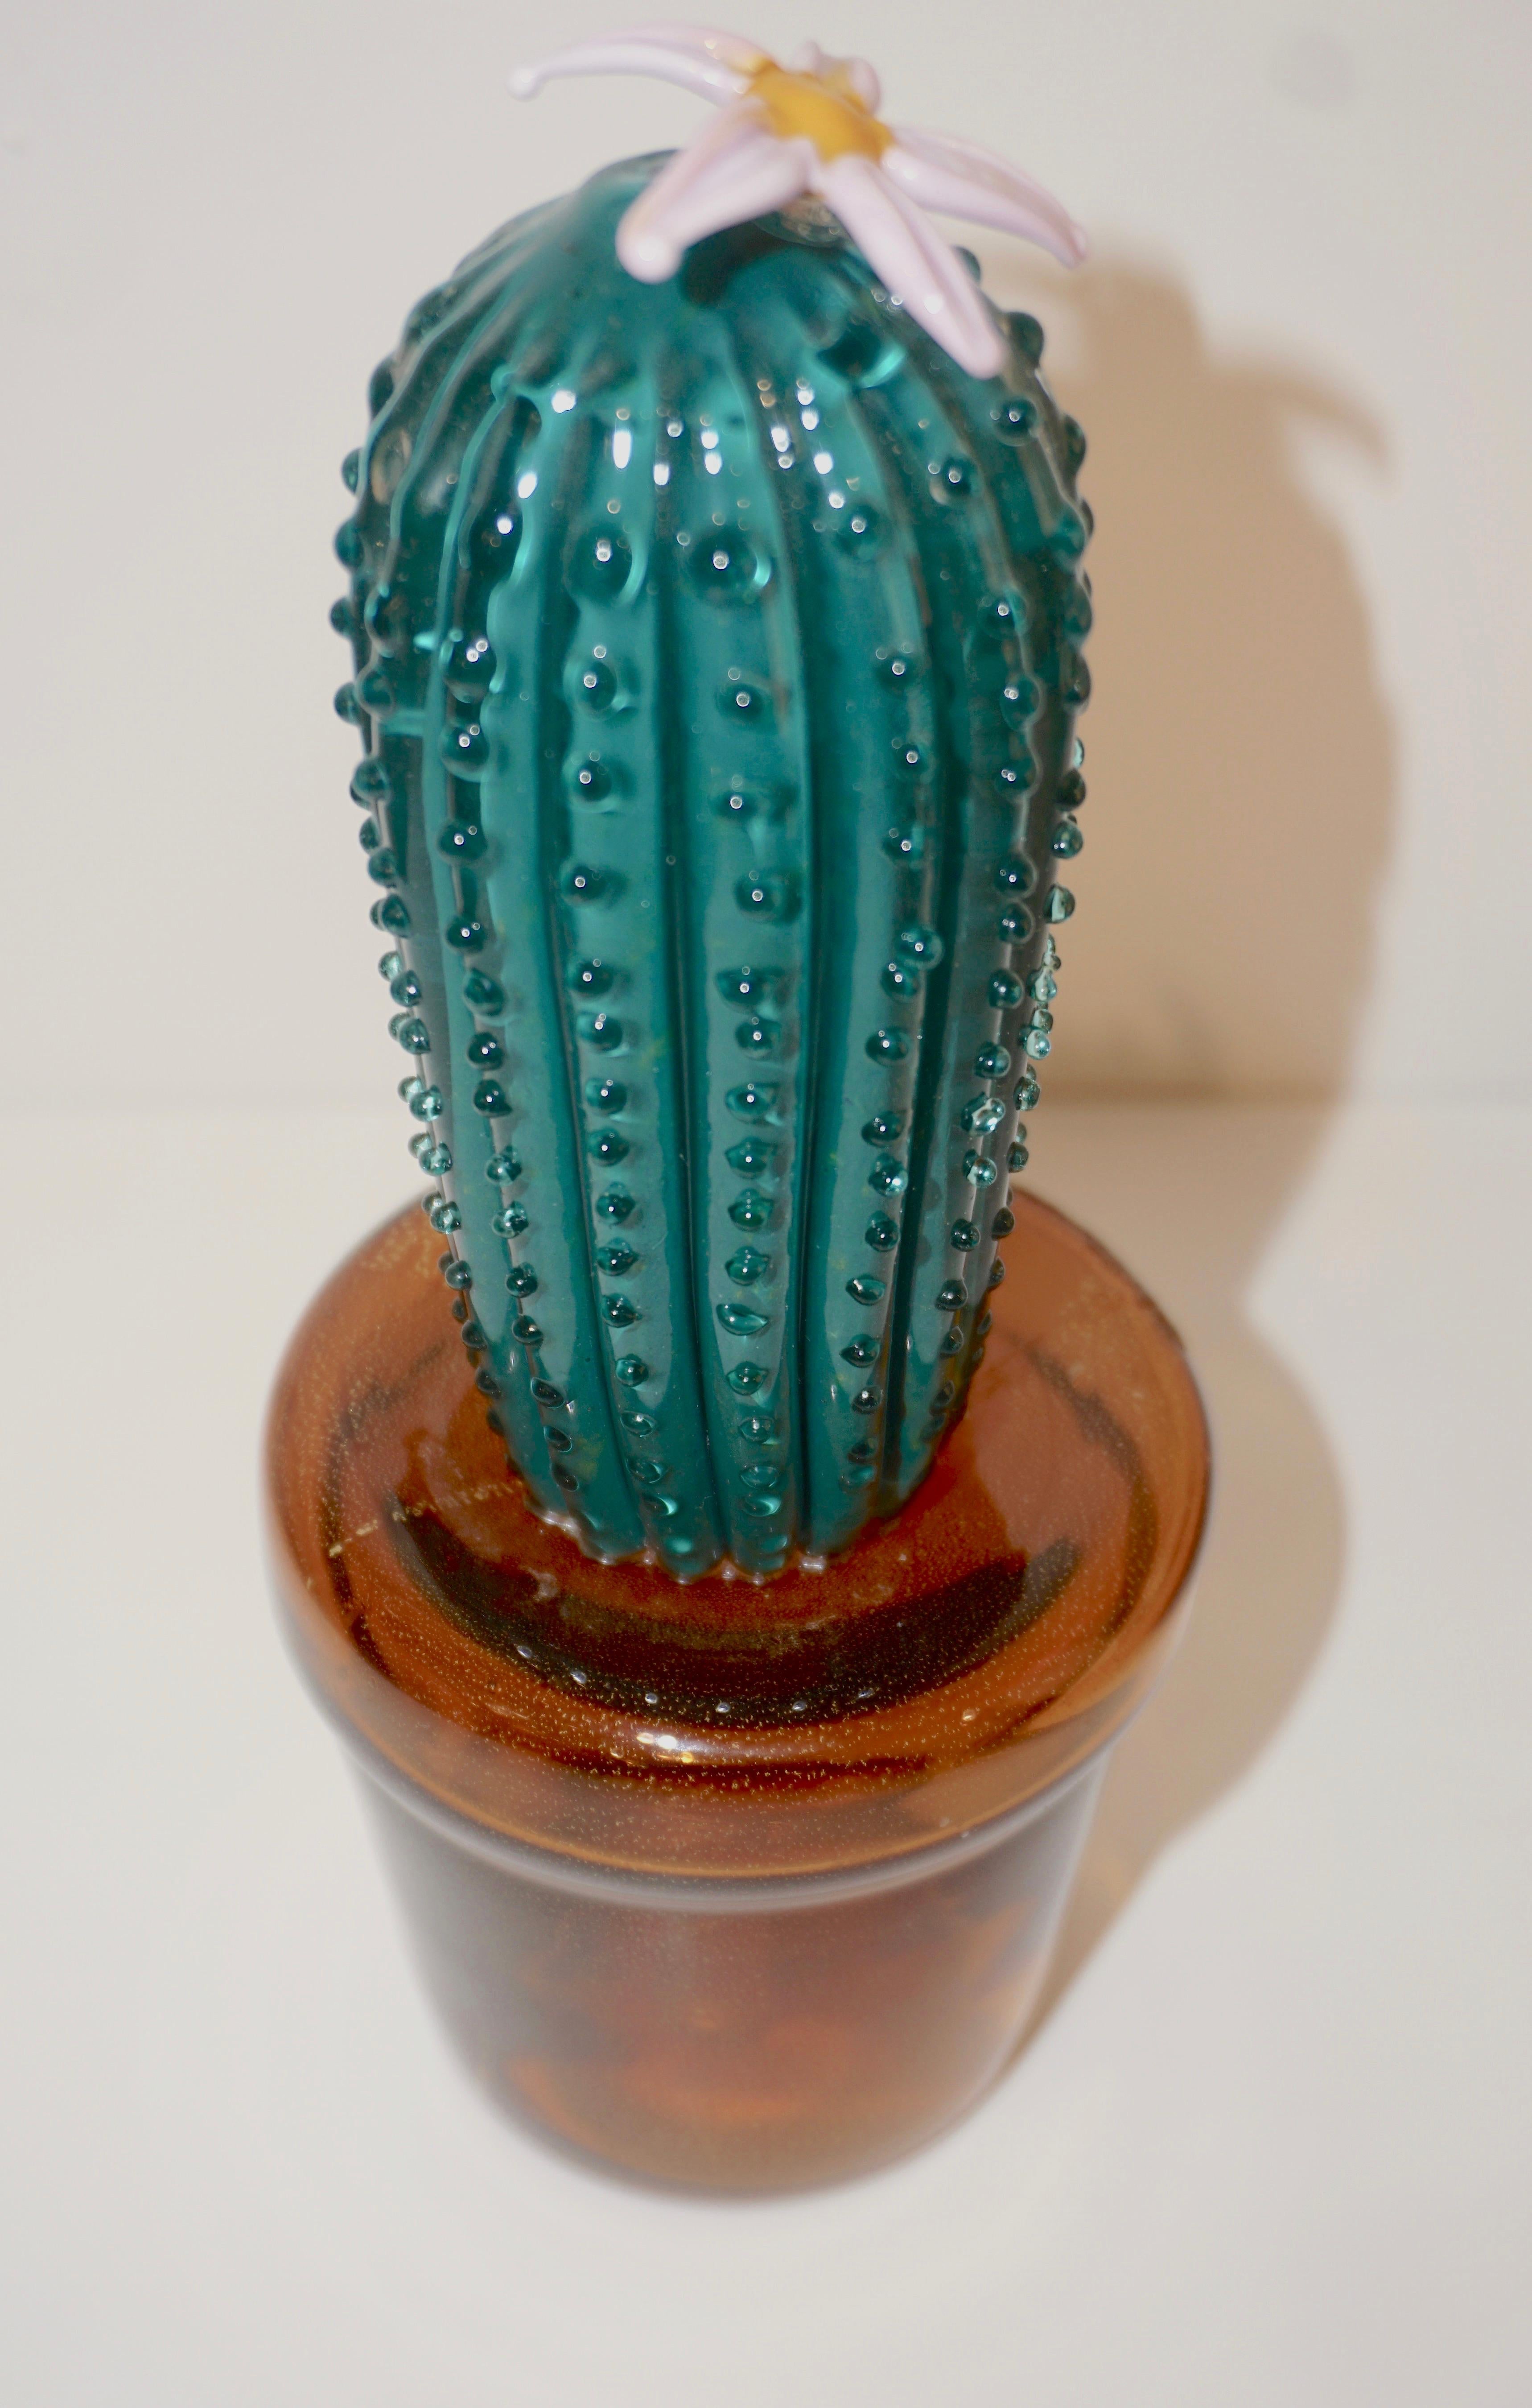 1990s Vintage Italian Teal Green Murano Glass Tall Cactus Plant with Gold Pot 4